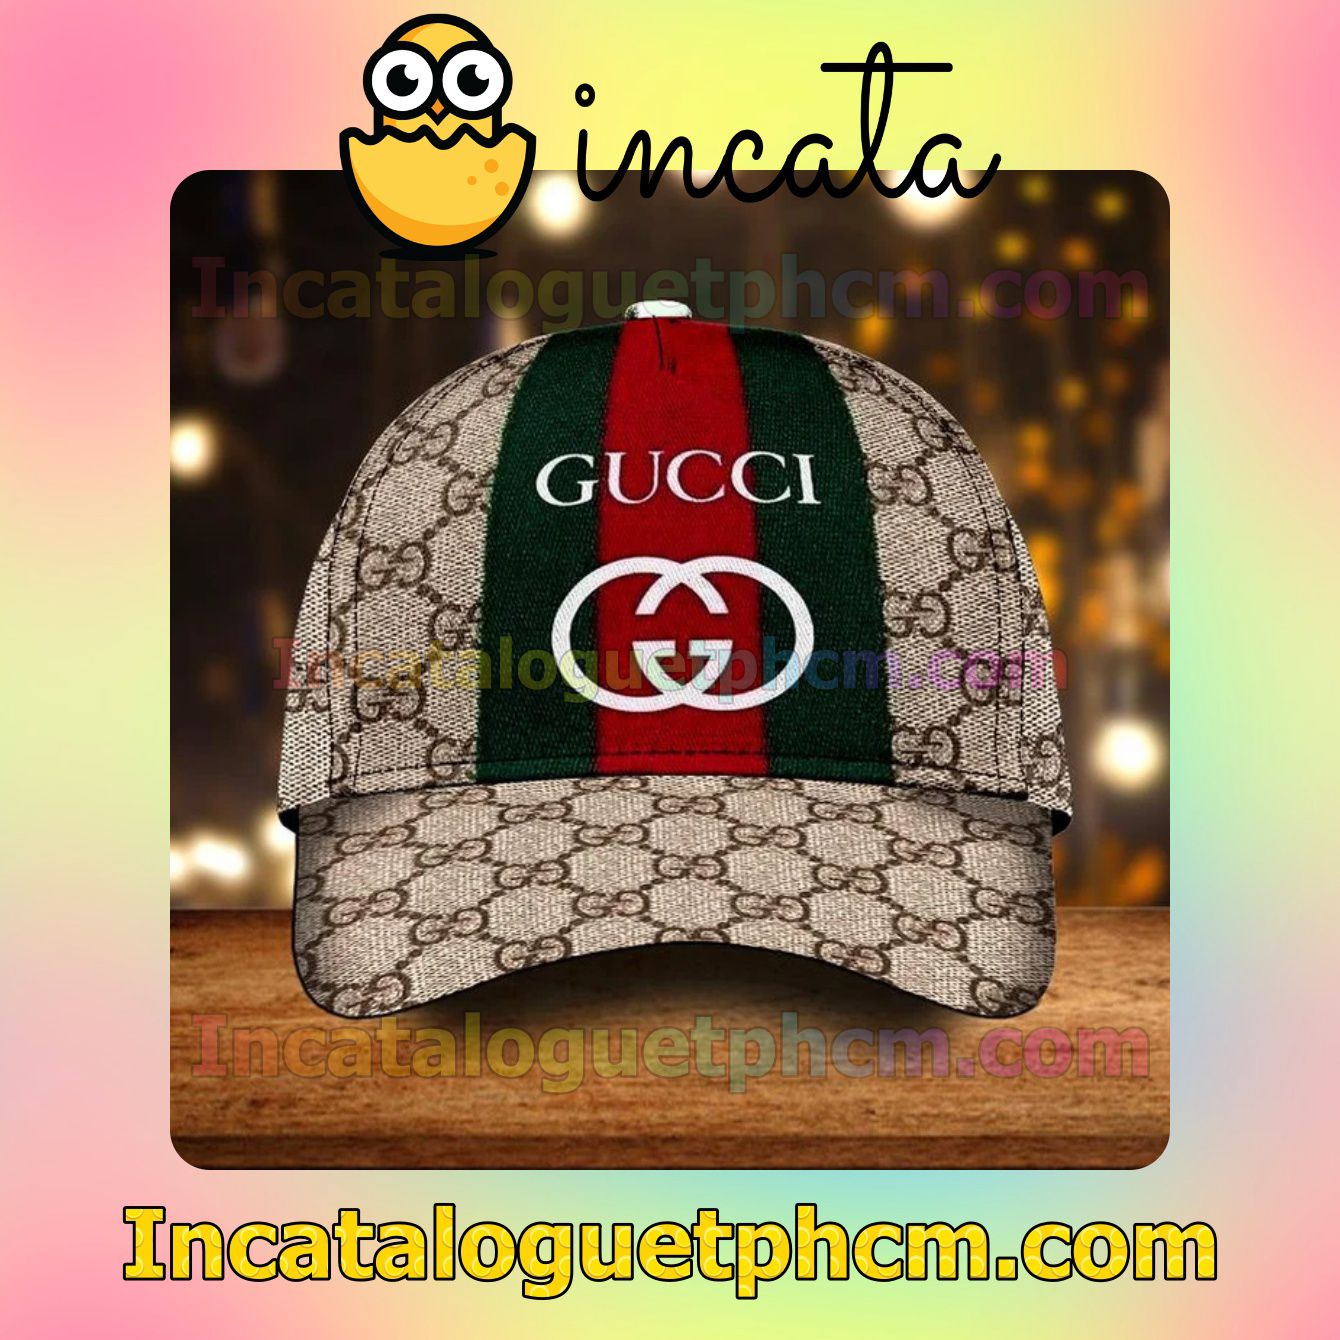 Gucci Beige With Brand Name And Logo On Green And Red Stripes Classic Hat Caps Gift For Men